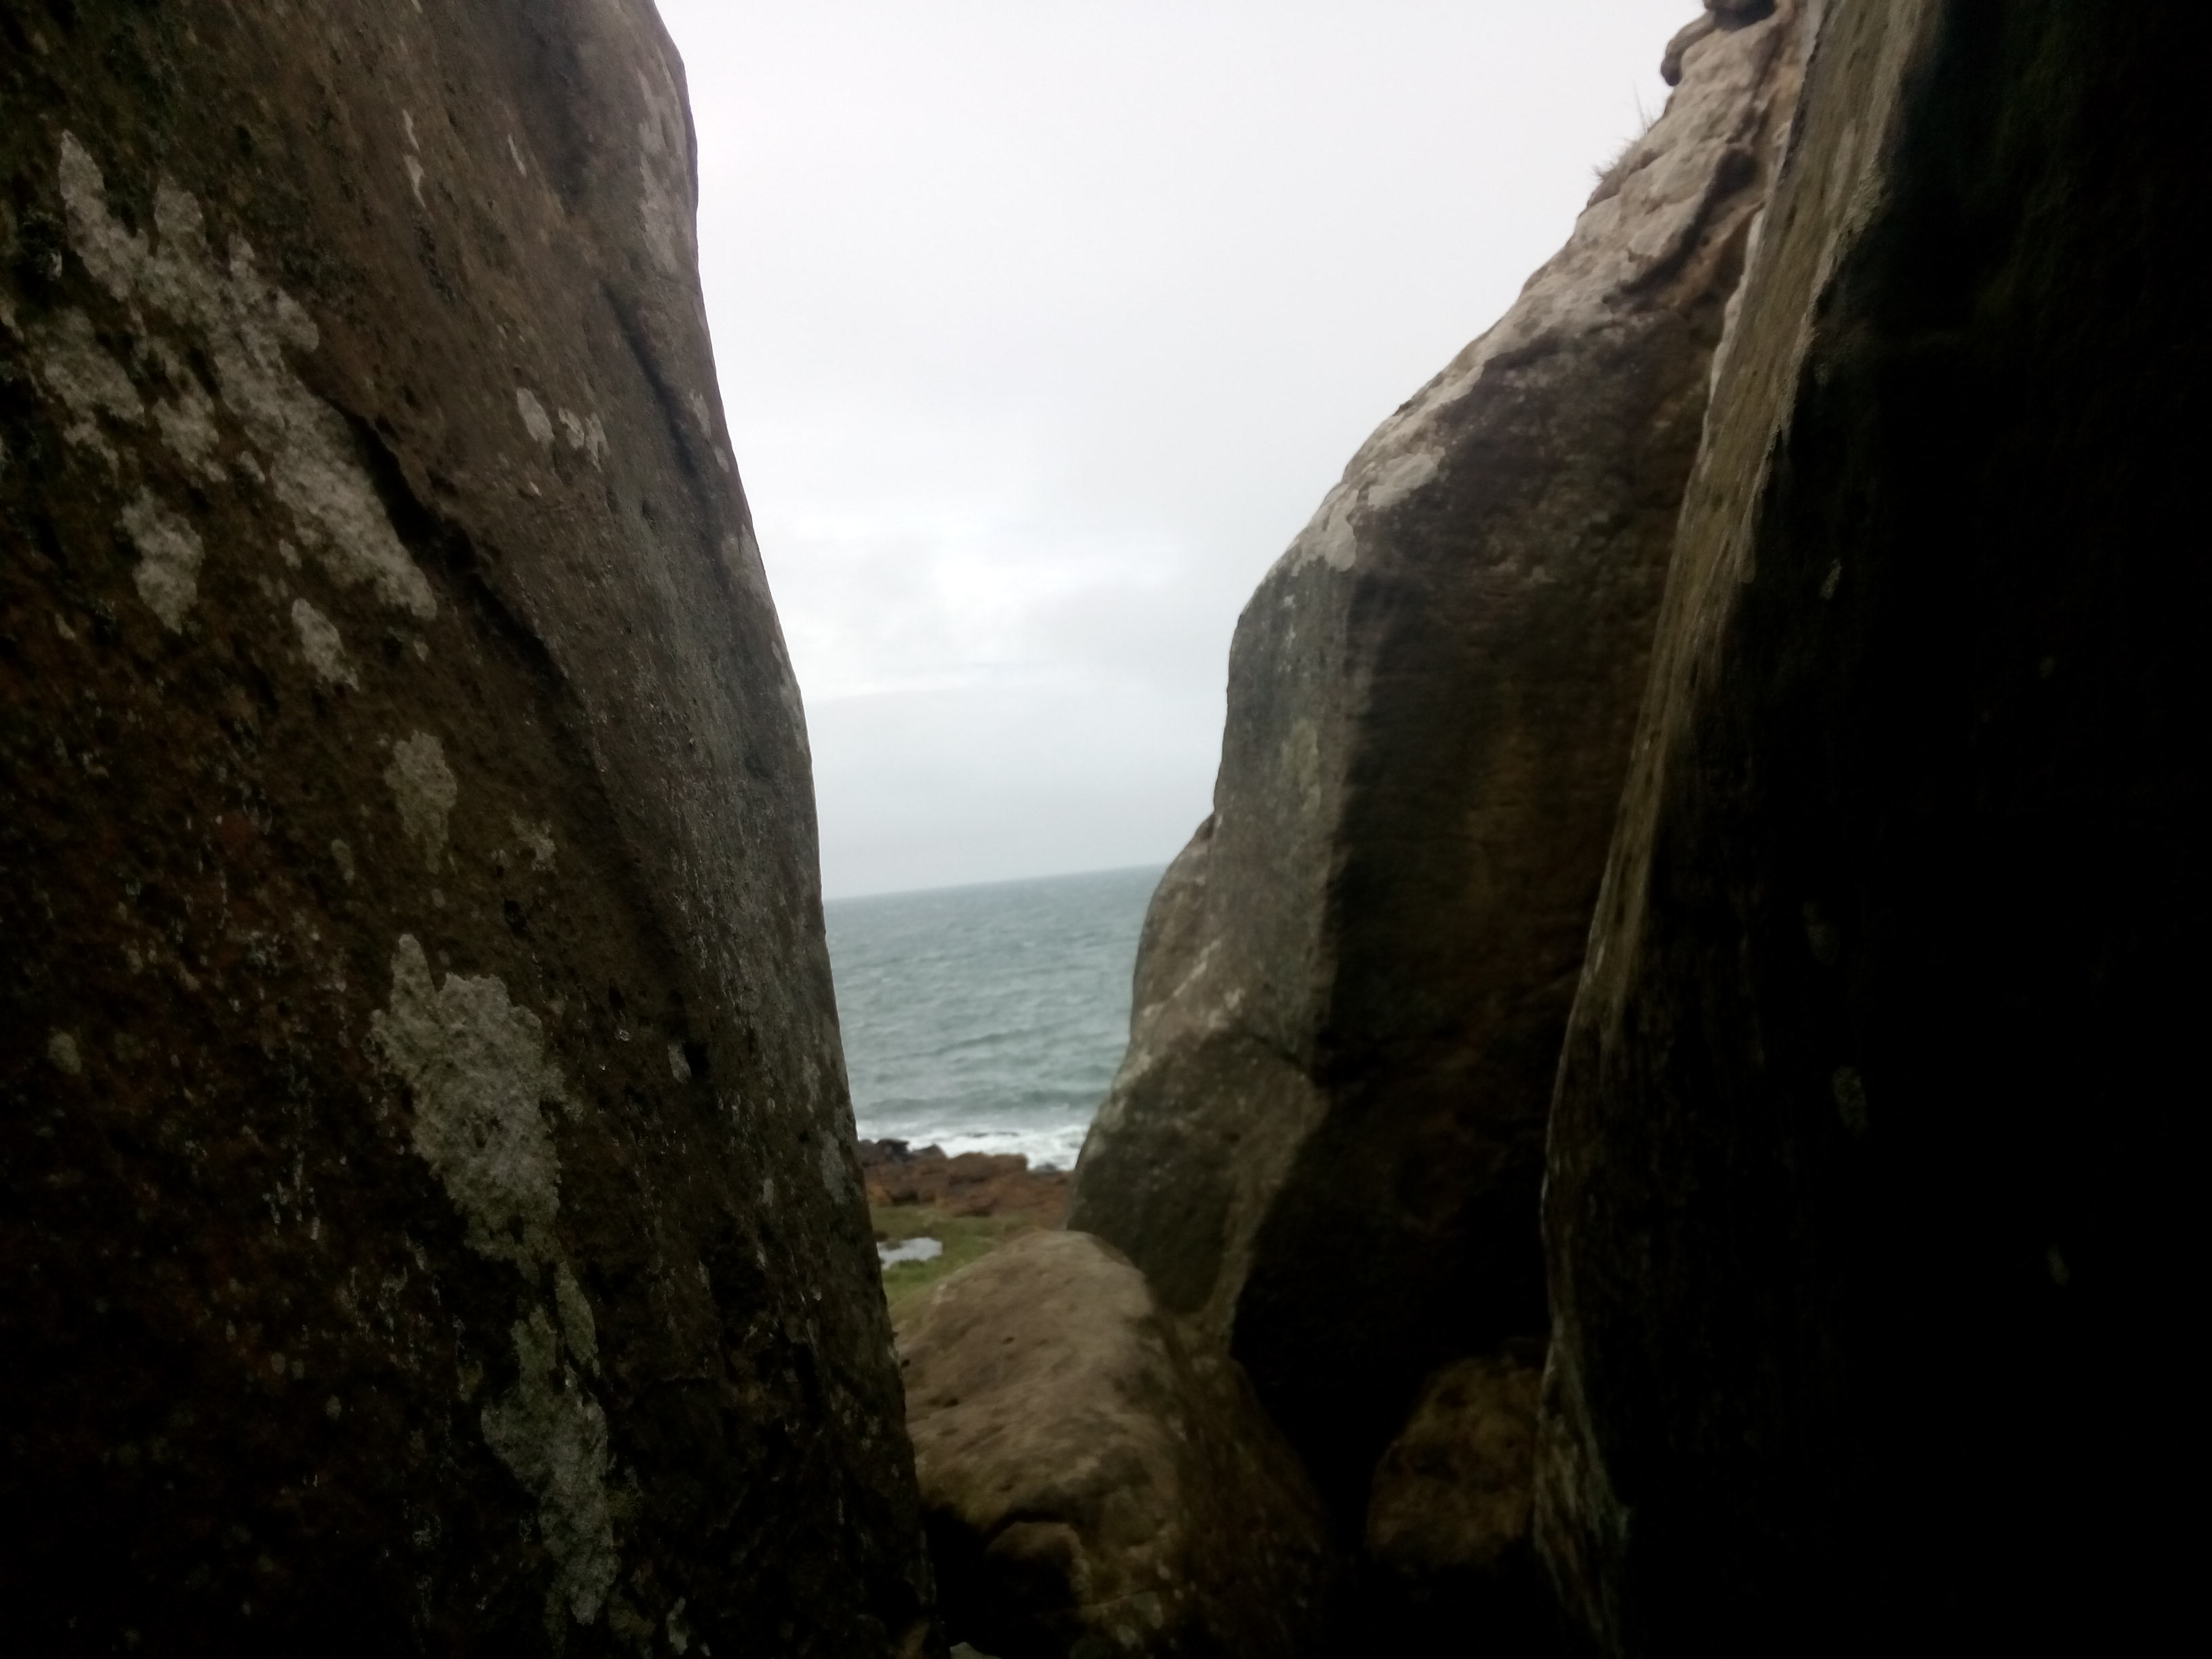 A view from between two large rocks, out to sea